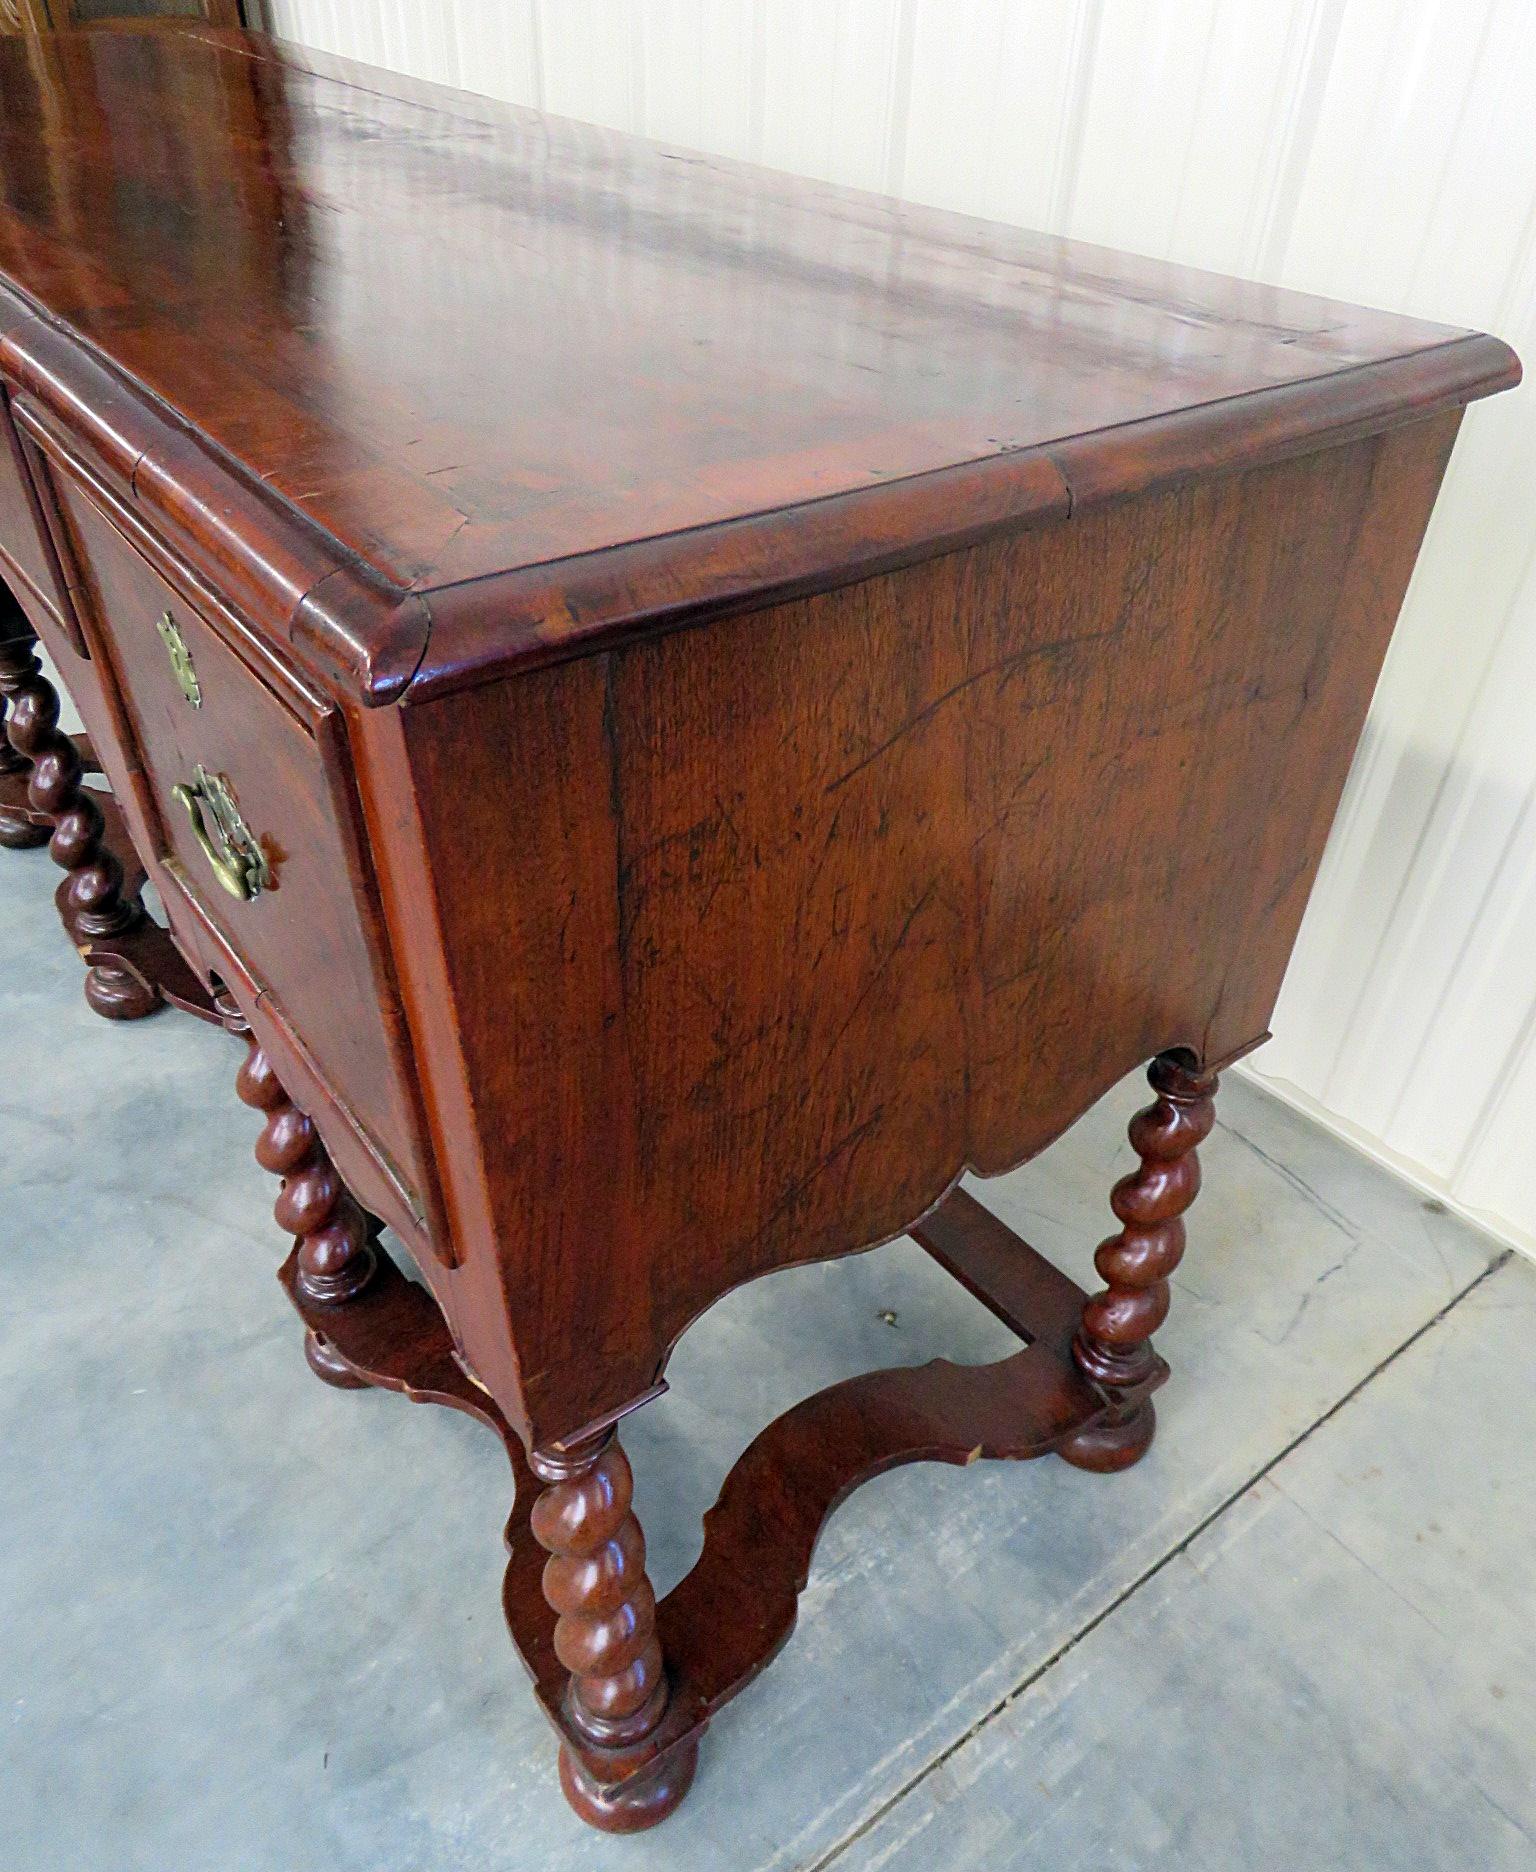 William and Mary Antique 18th Century William & Mary Barley Twist Buffet Server Sideboard